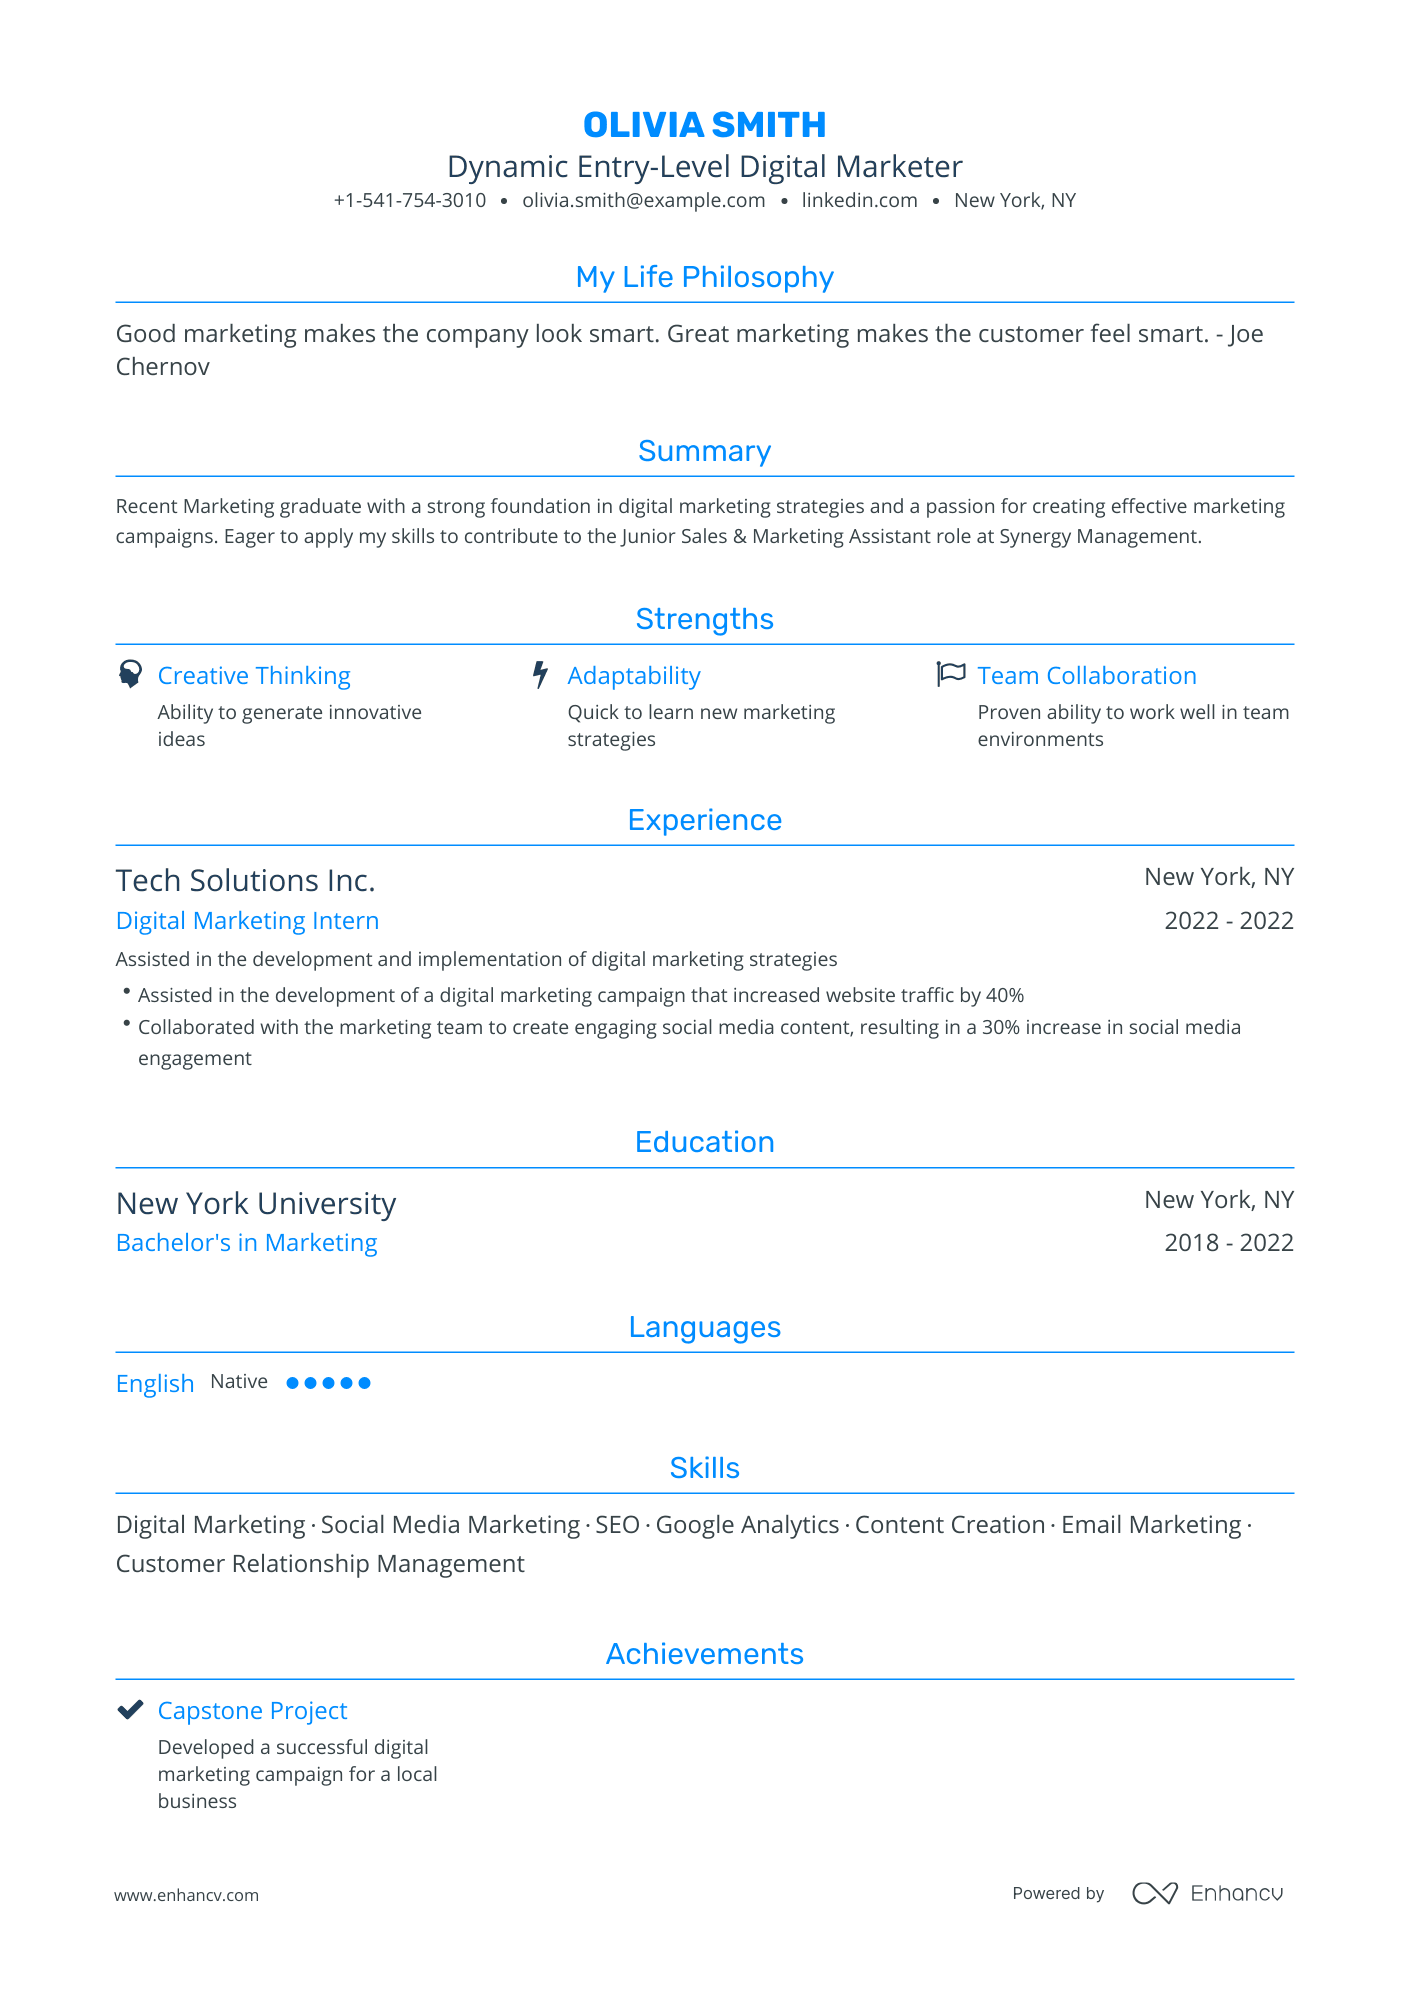 Traditional Entry Level Digital Marketing Resume Template